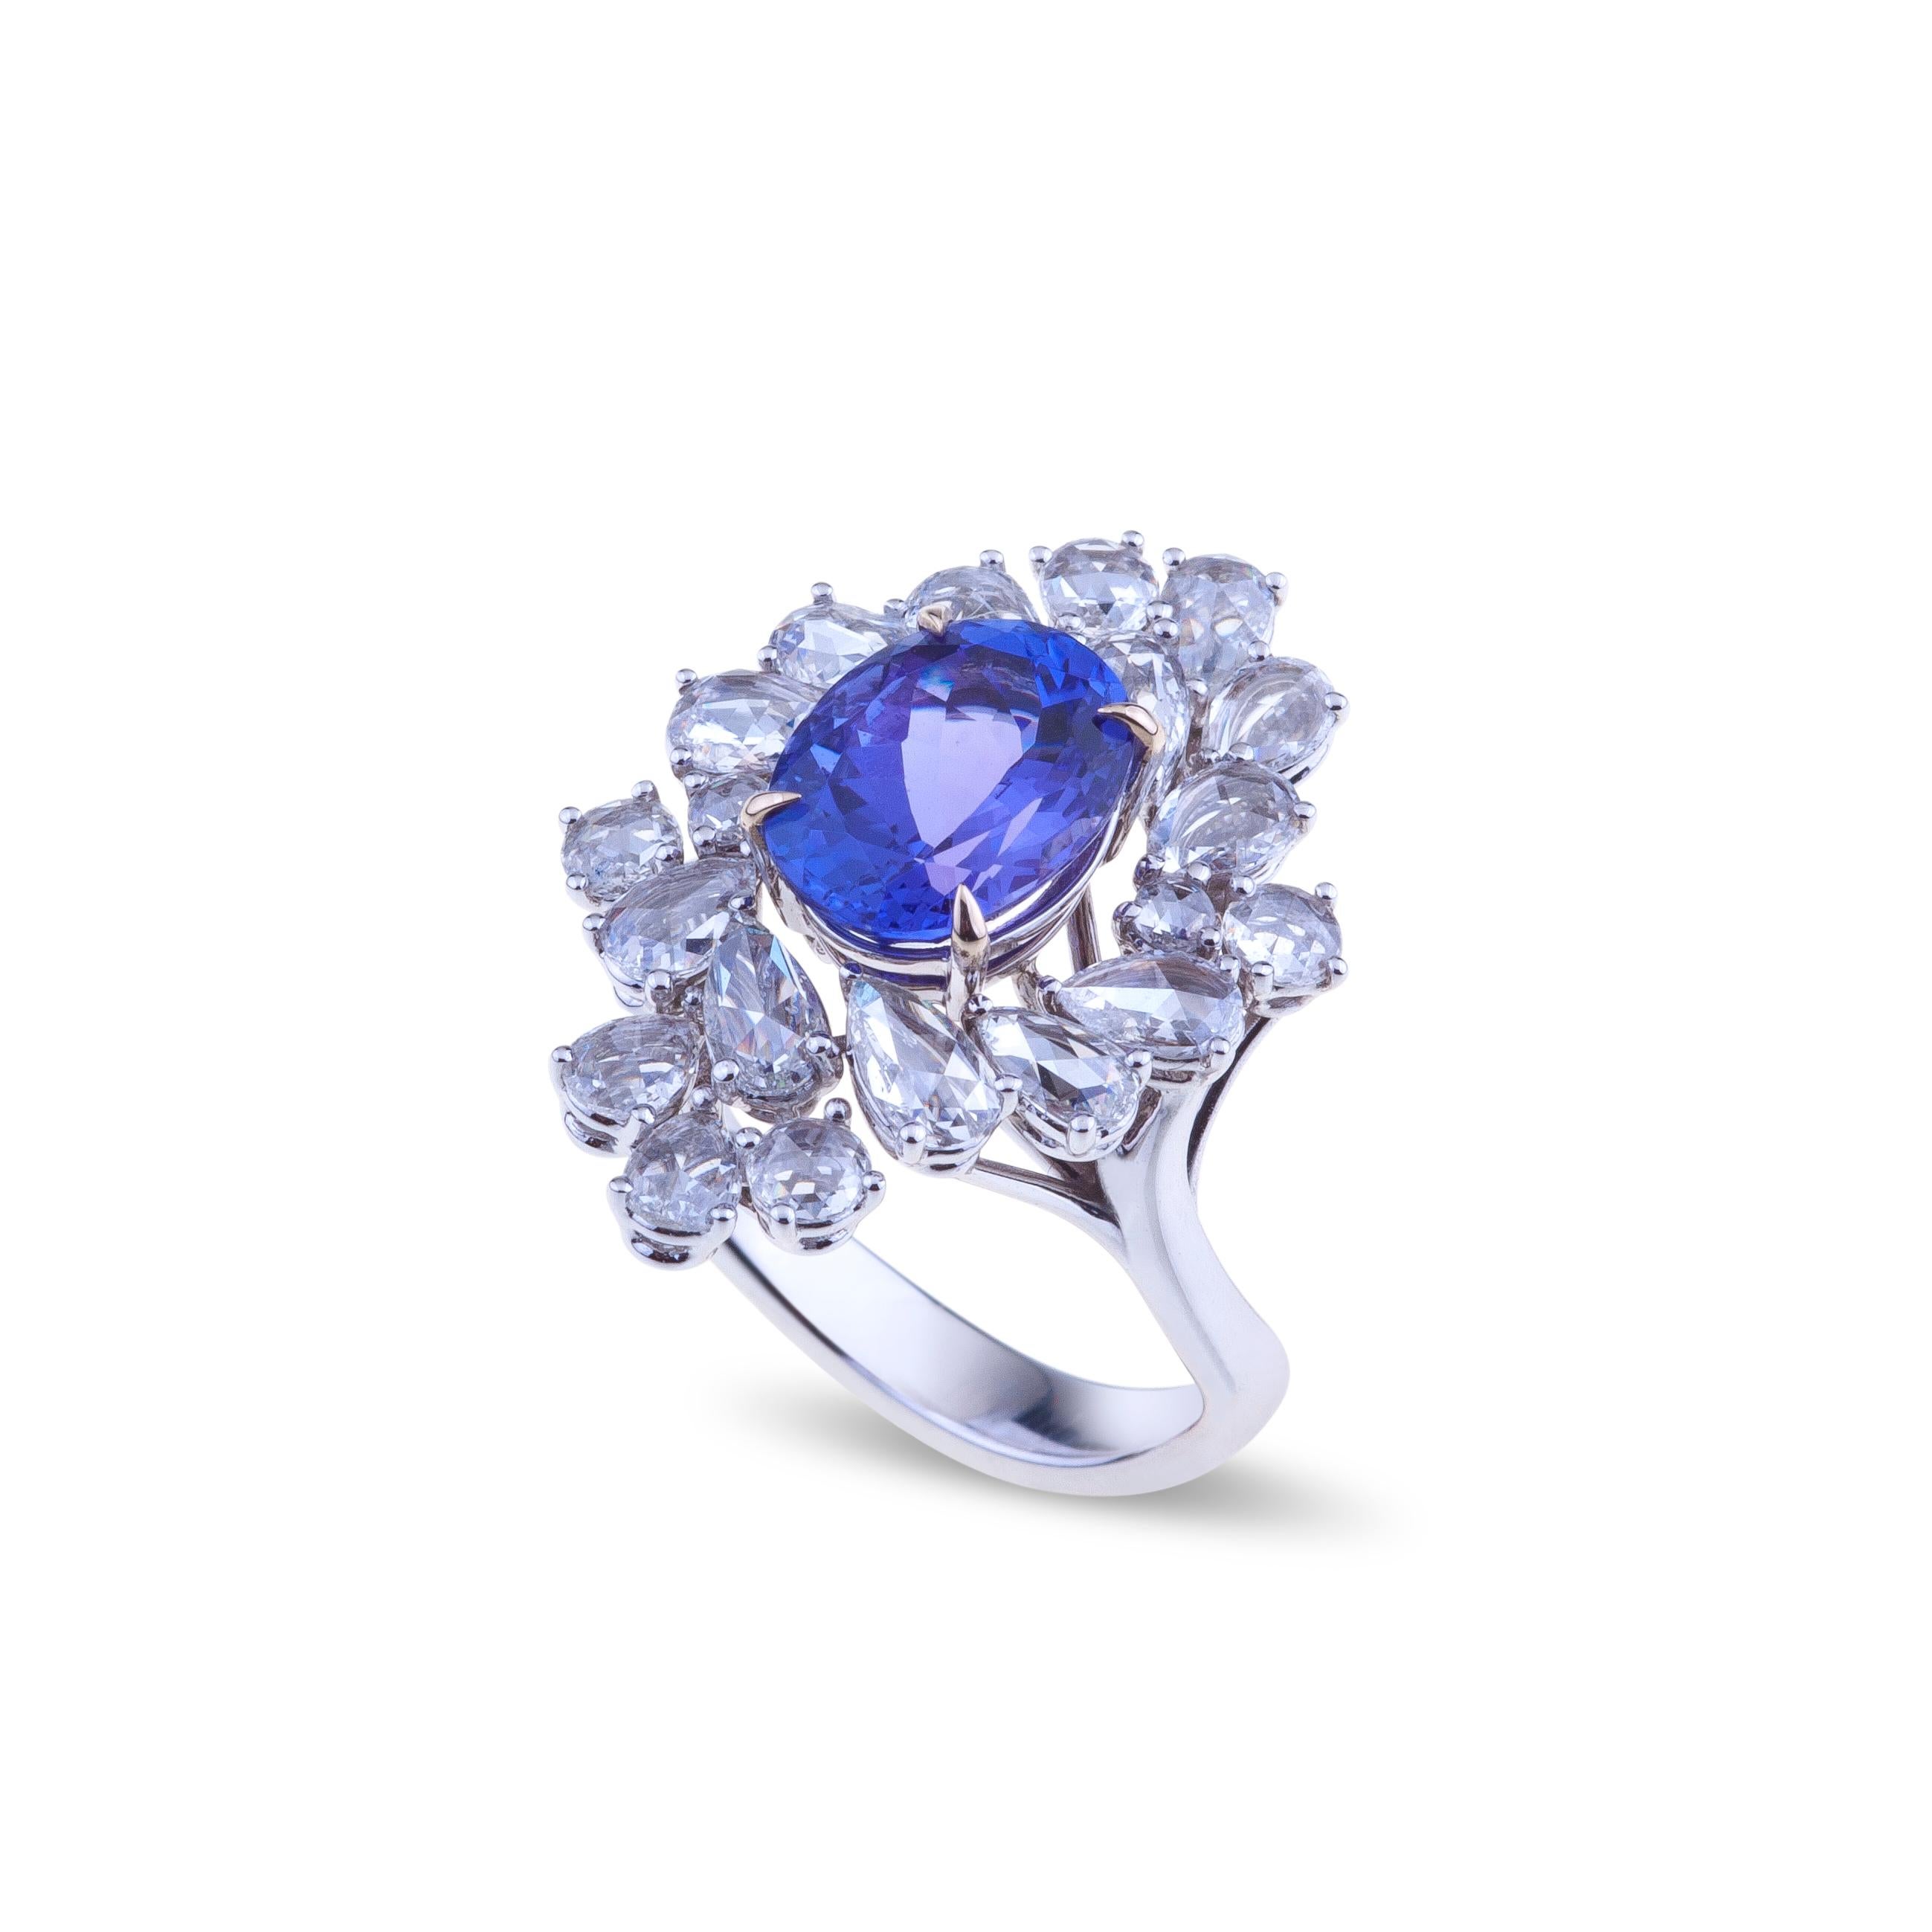 Selected intense blue tanzanite ring set in white gold with diamonds.
A unique white gold ring  with a selected intense blue tanzanite ct. 3.43 faceted oval cut and diamonds ct. 1.88 VVS which are a perfect mix of round and pears rose cut The weight